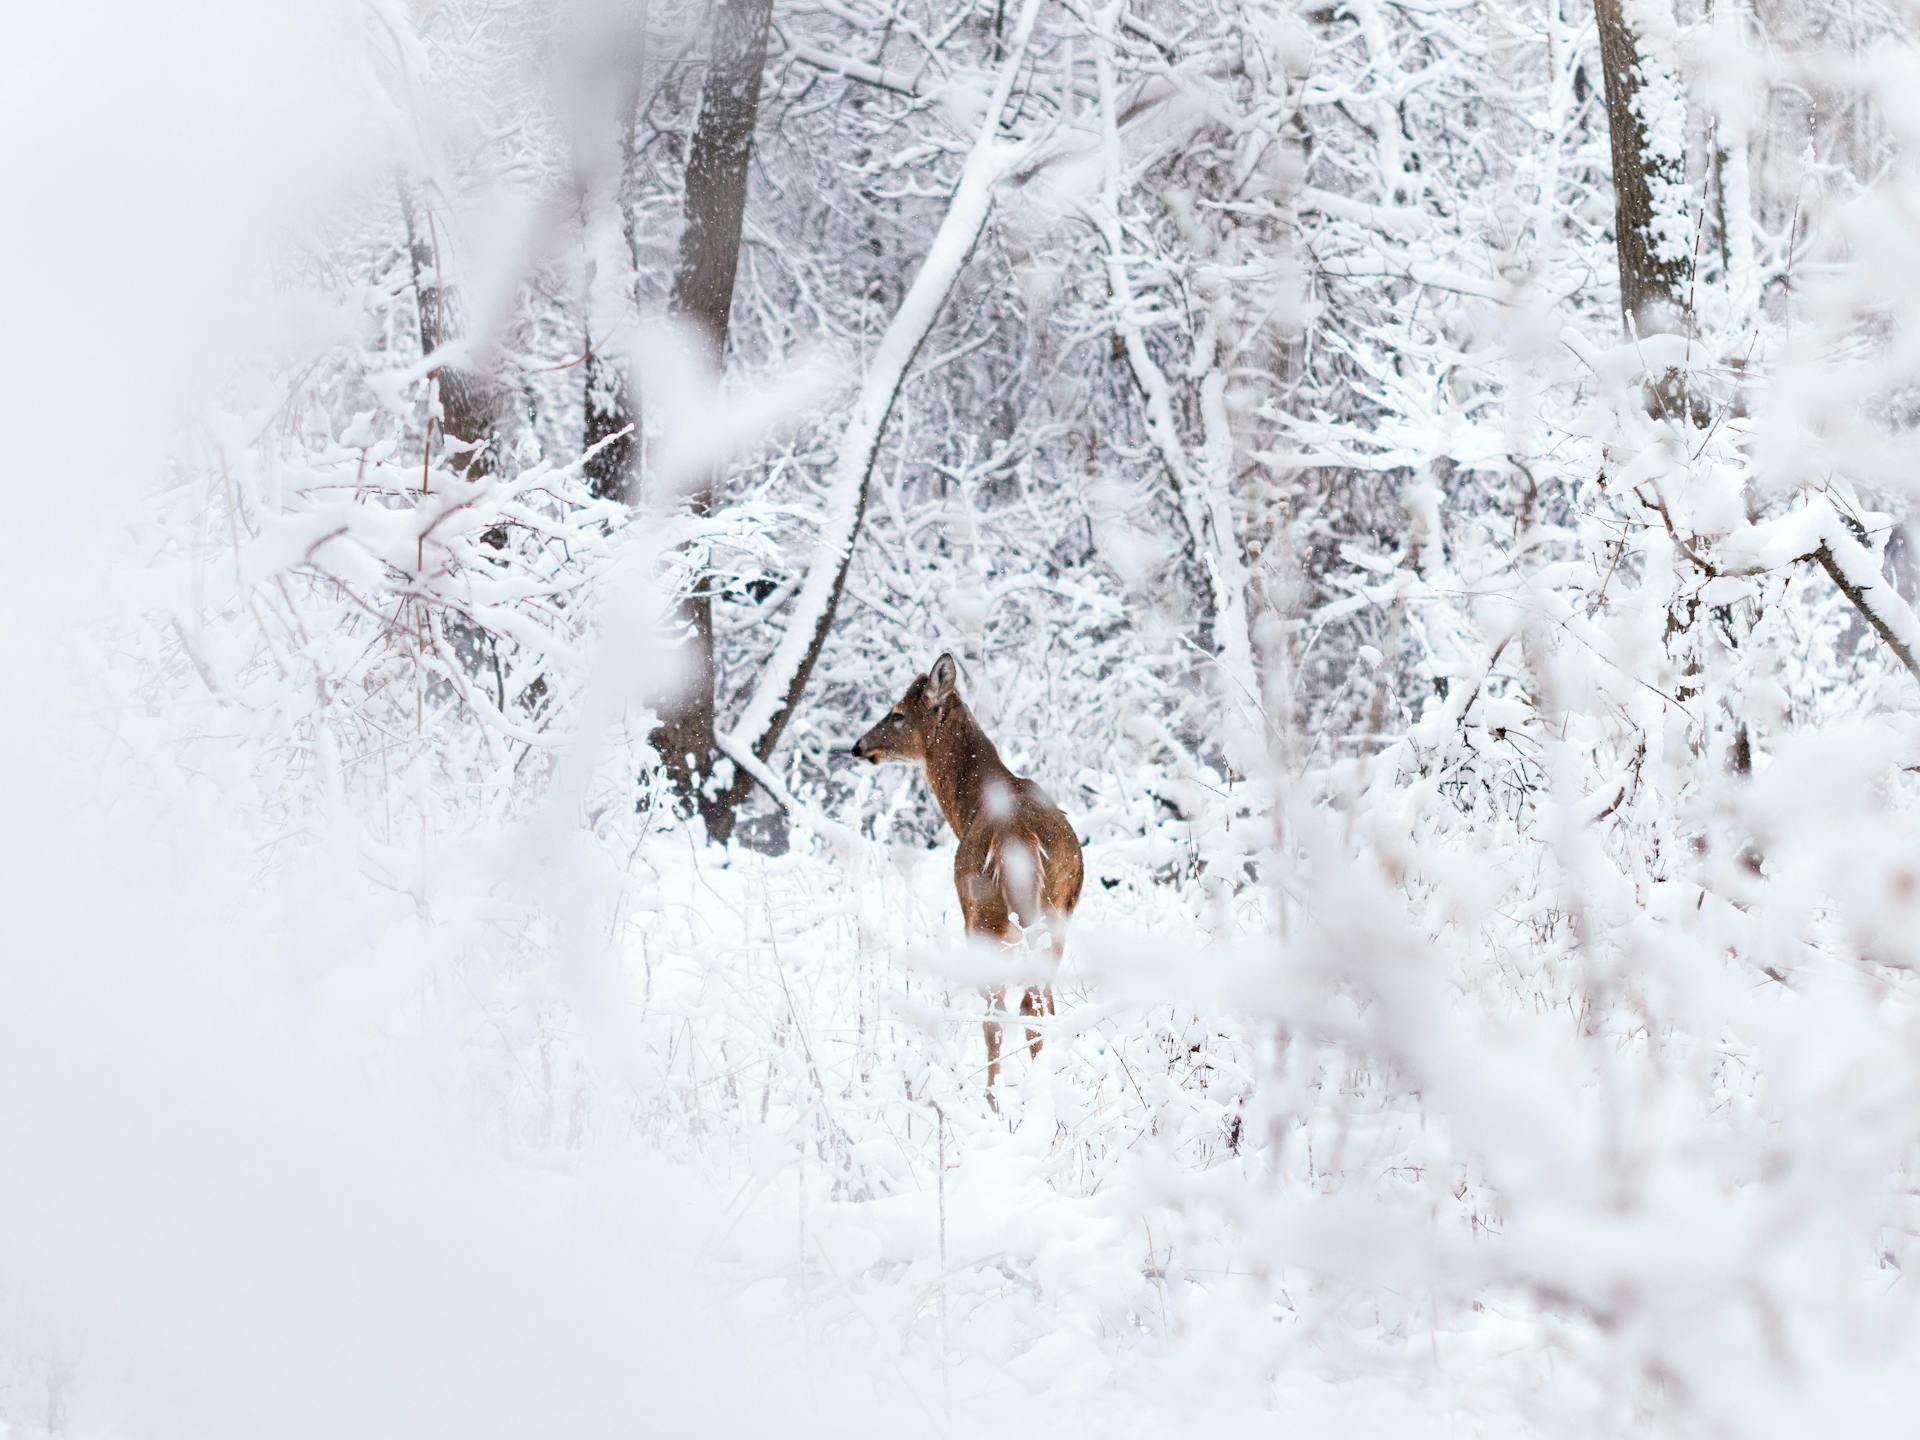 Deer spotted in woods during winter in Alagna Valsesia